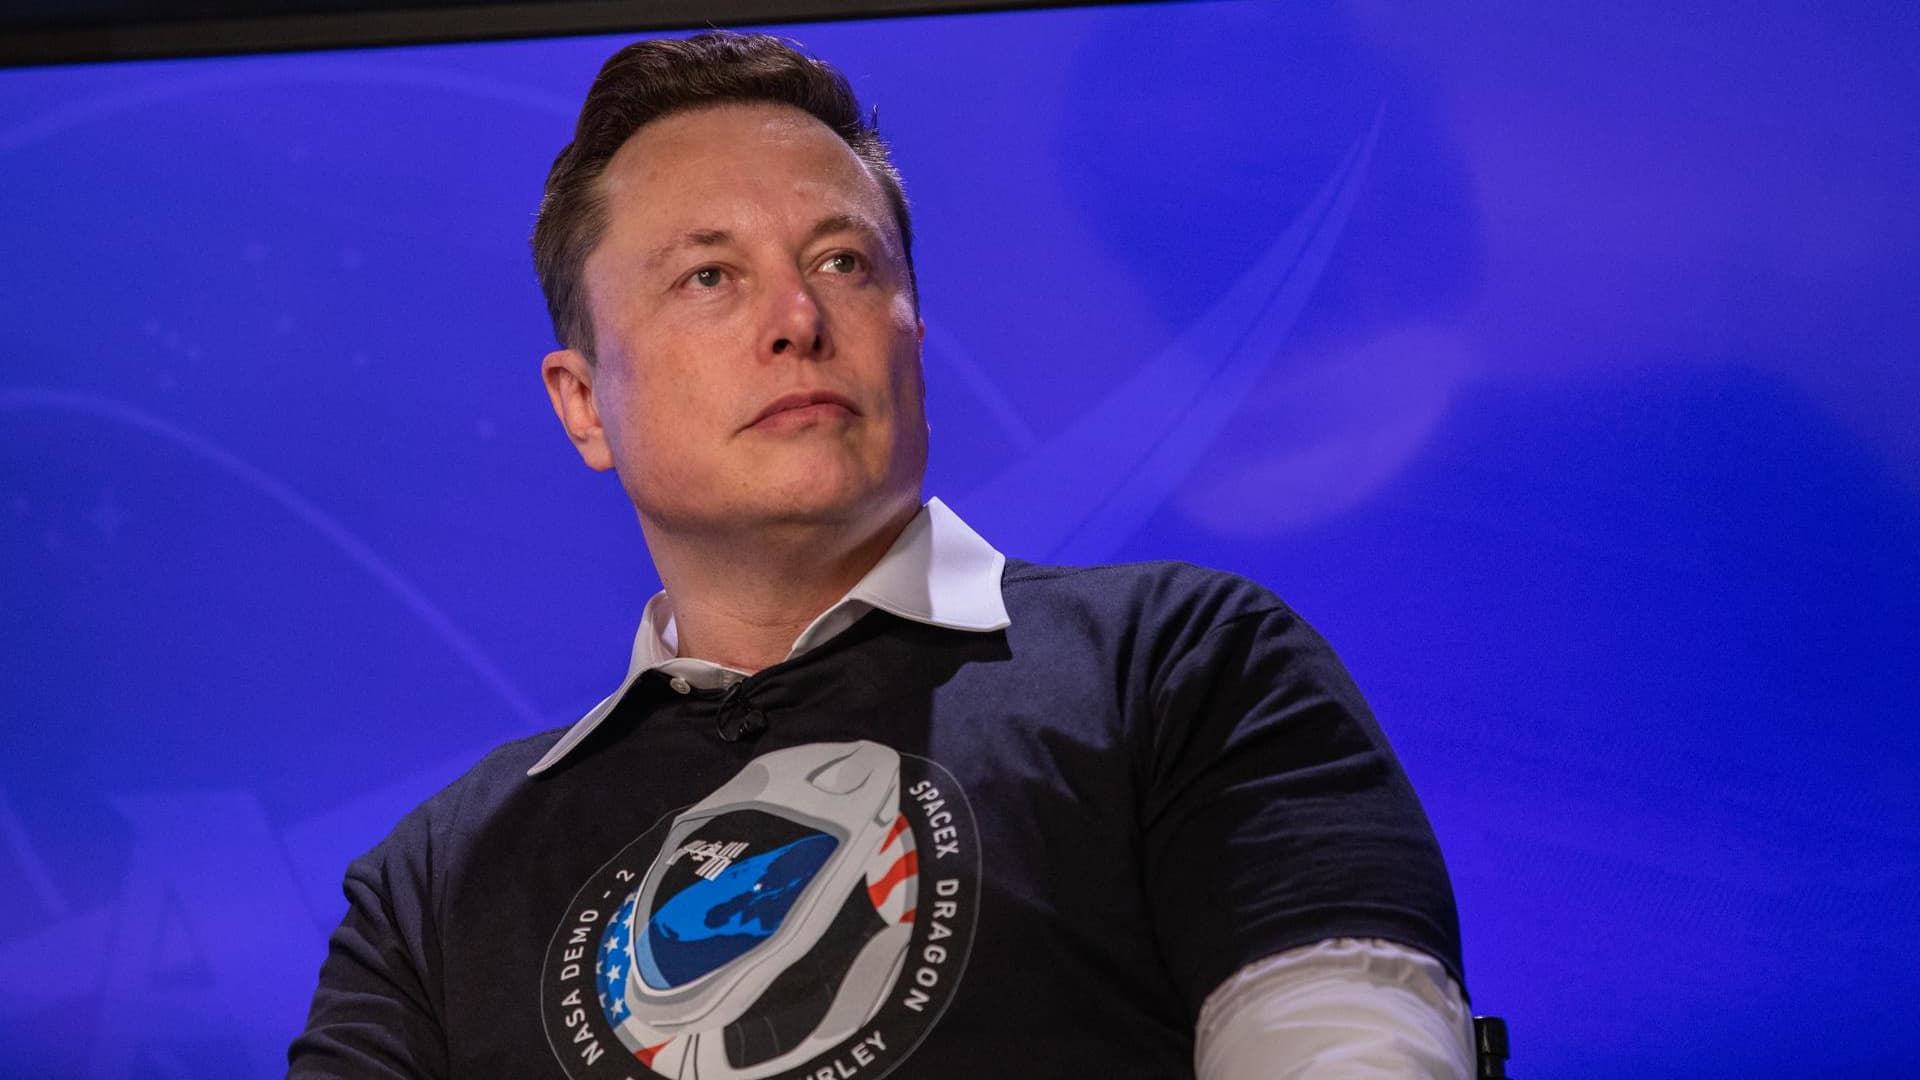 Report says SpaceX paid woman over Musk sex misconduct claim – he denies ‘wild accusations’